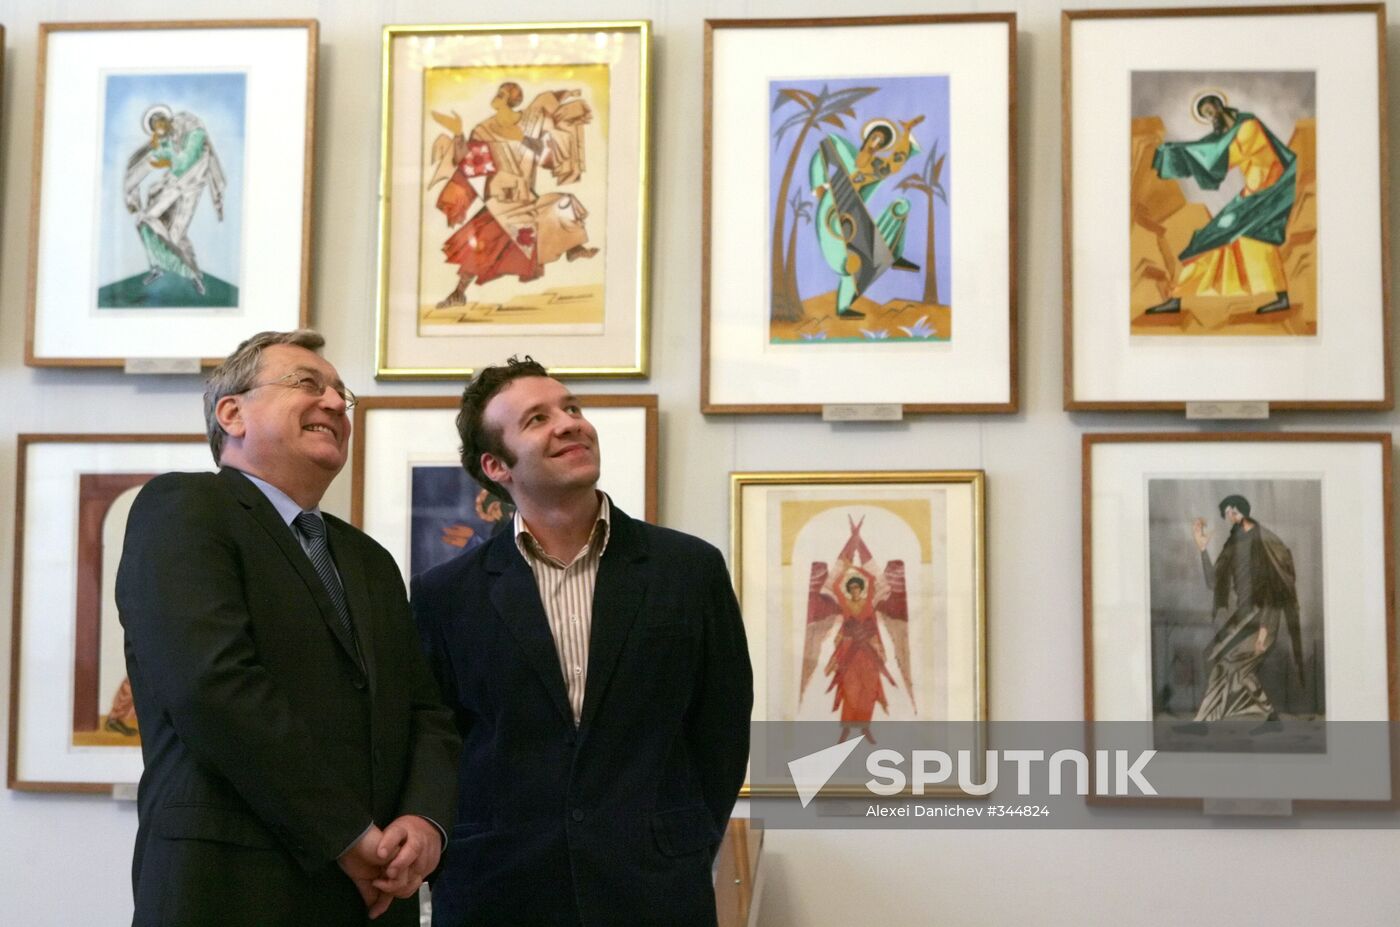 Exhibition "Lobanov-Rostovsky collection: back to Russia".